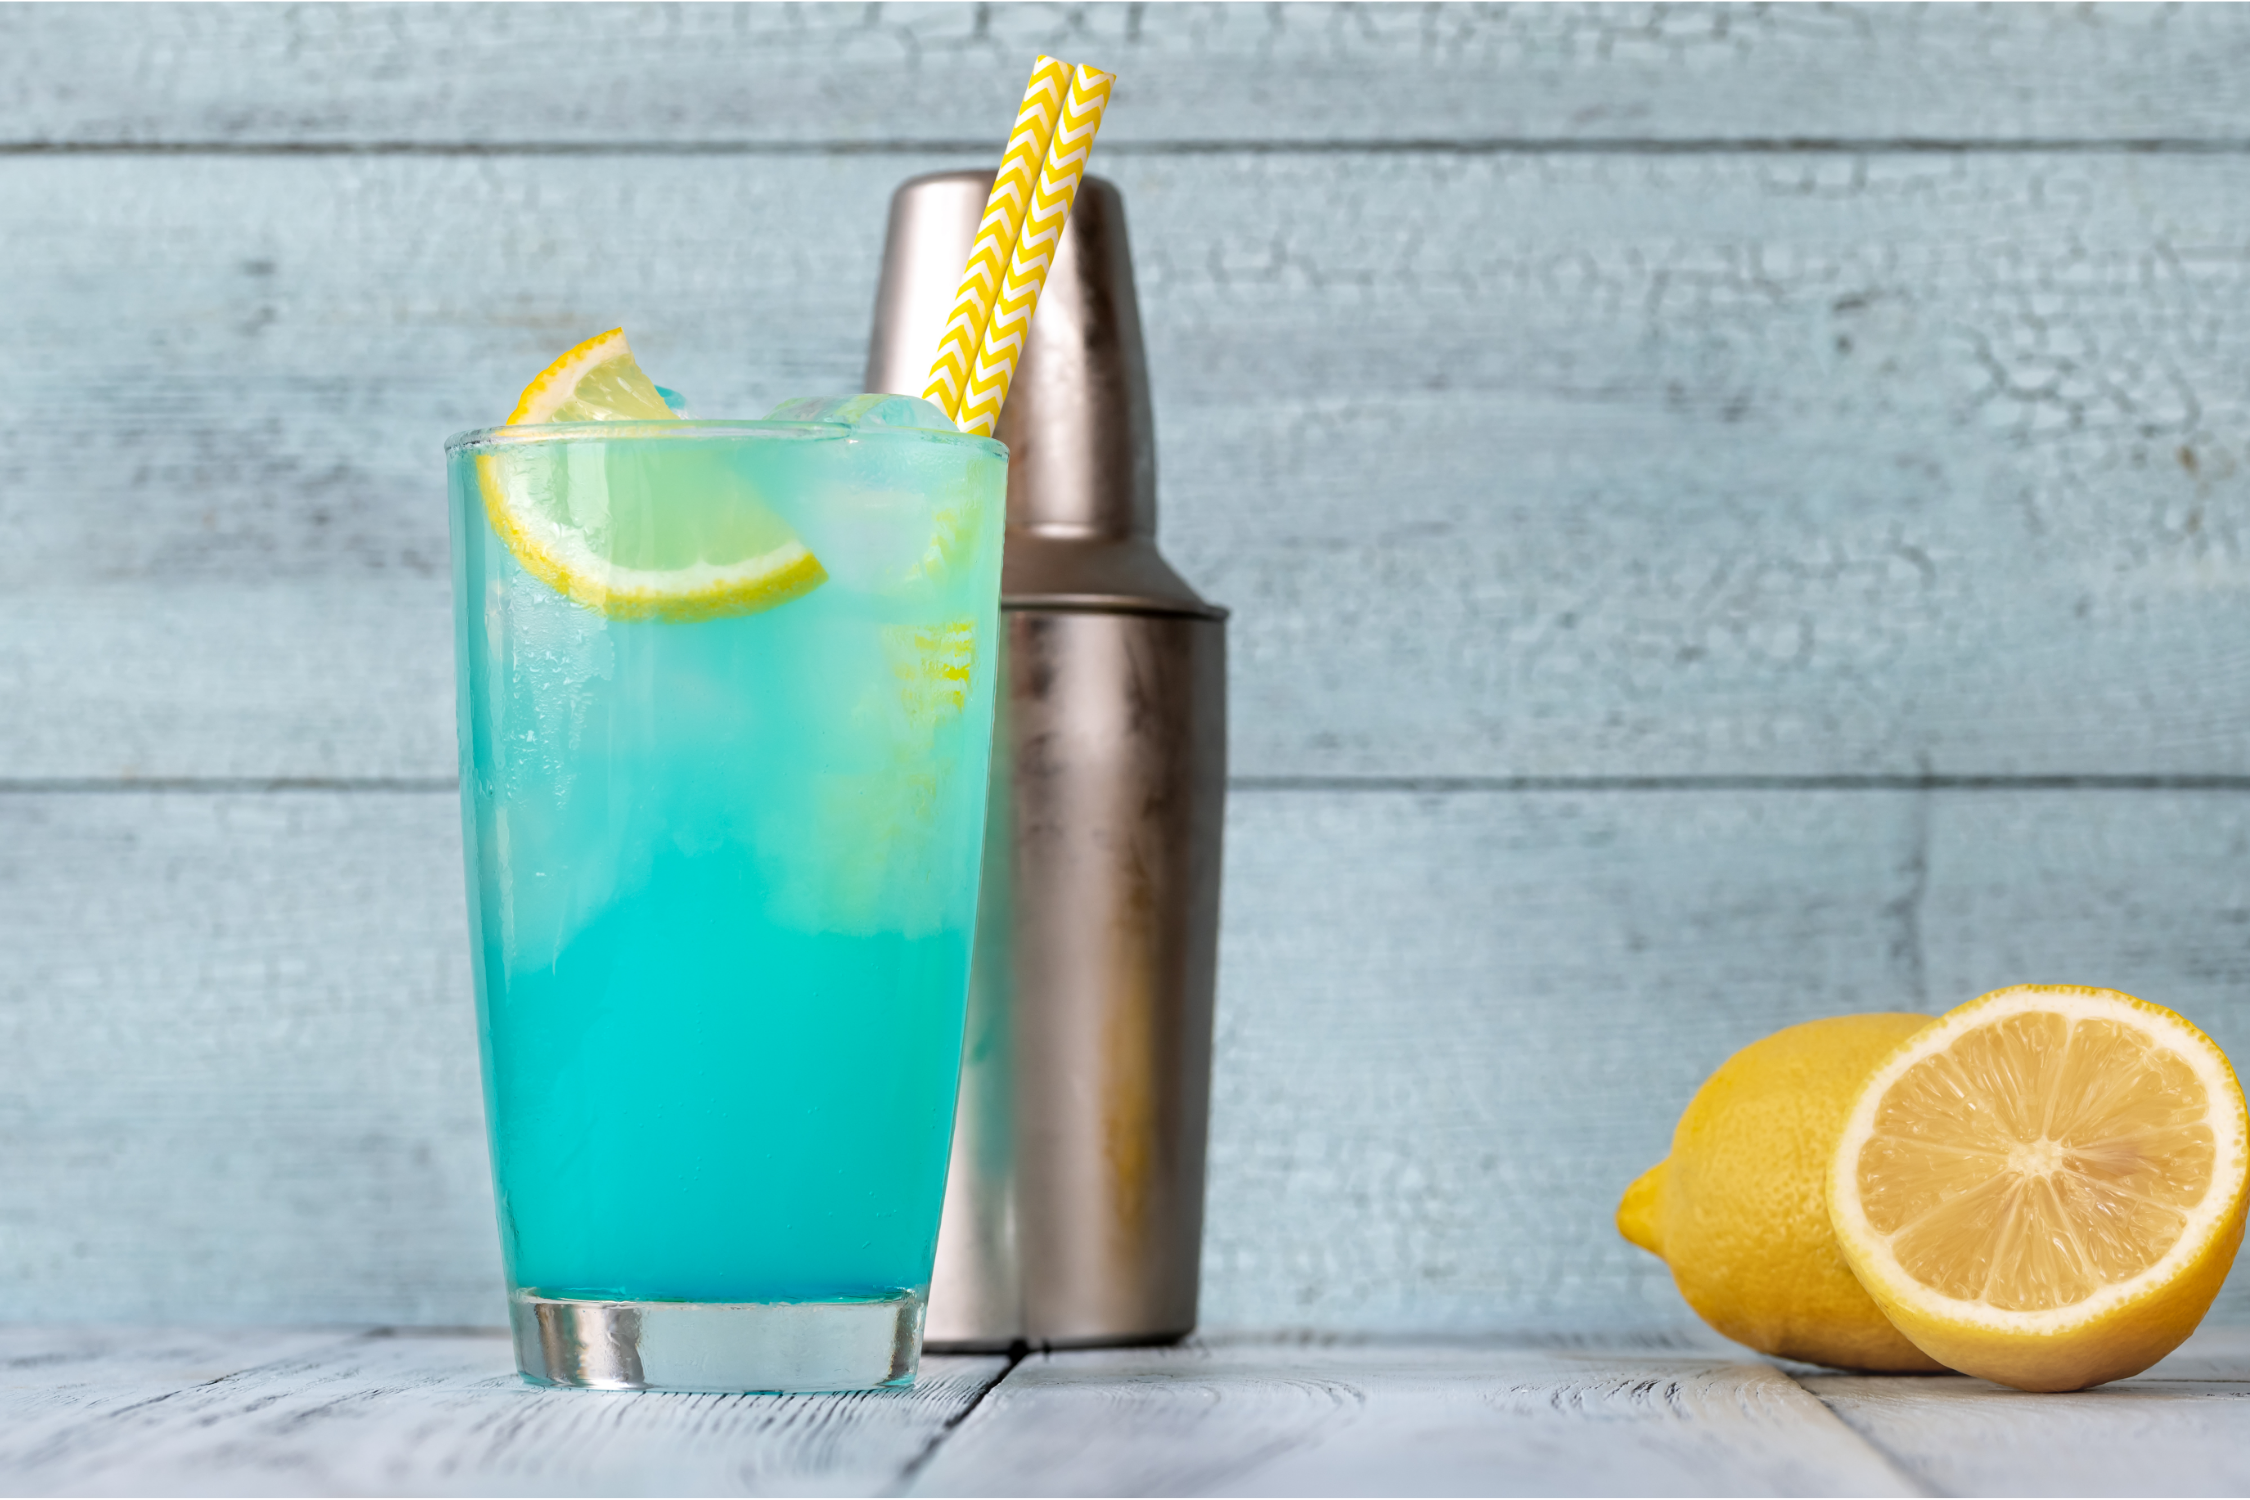 “Zap” Your Worries With Tribe CBD’s Electric Lemonade